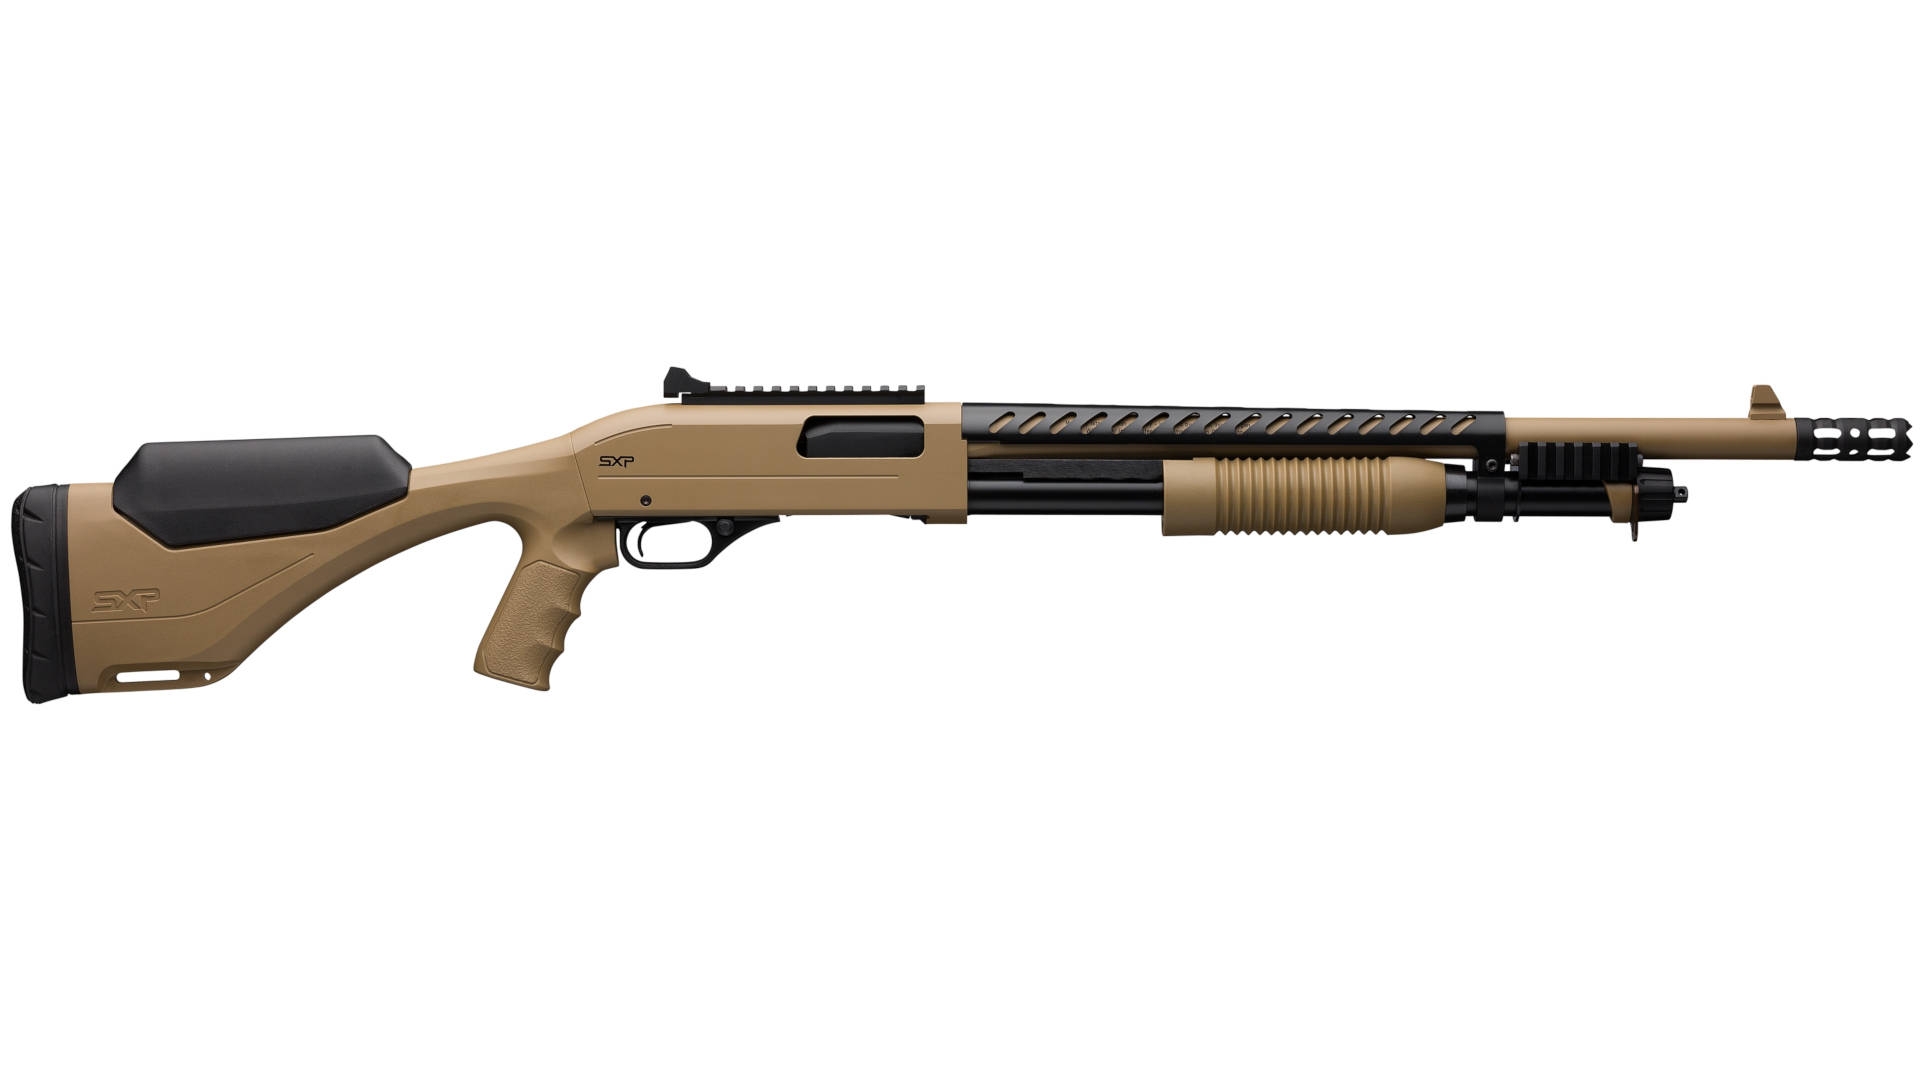 Winchester SHOT Show Specials 2021 – 44 special and partly limited rifle/ shotgun models for hunters and sport shooters!